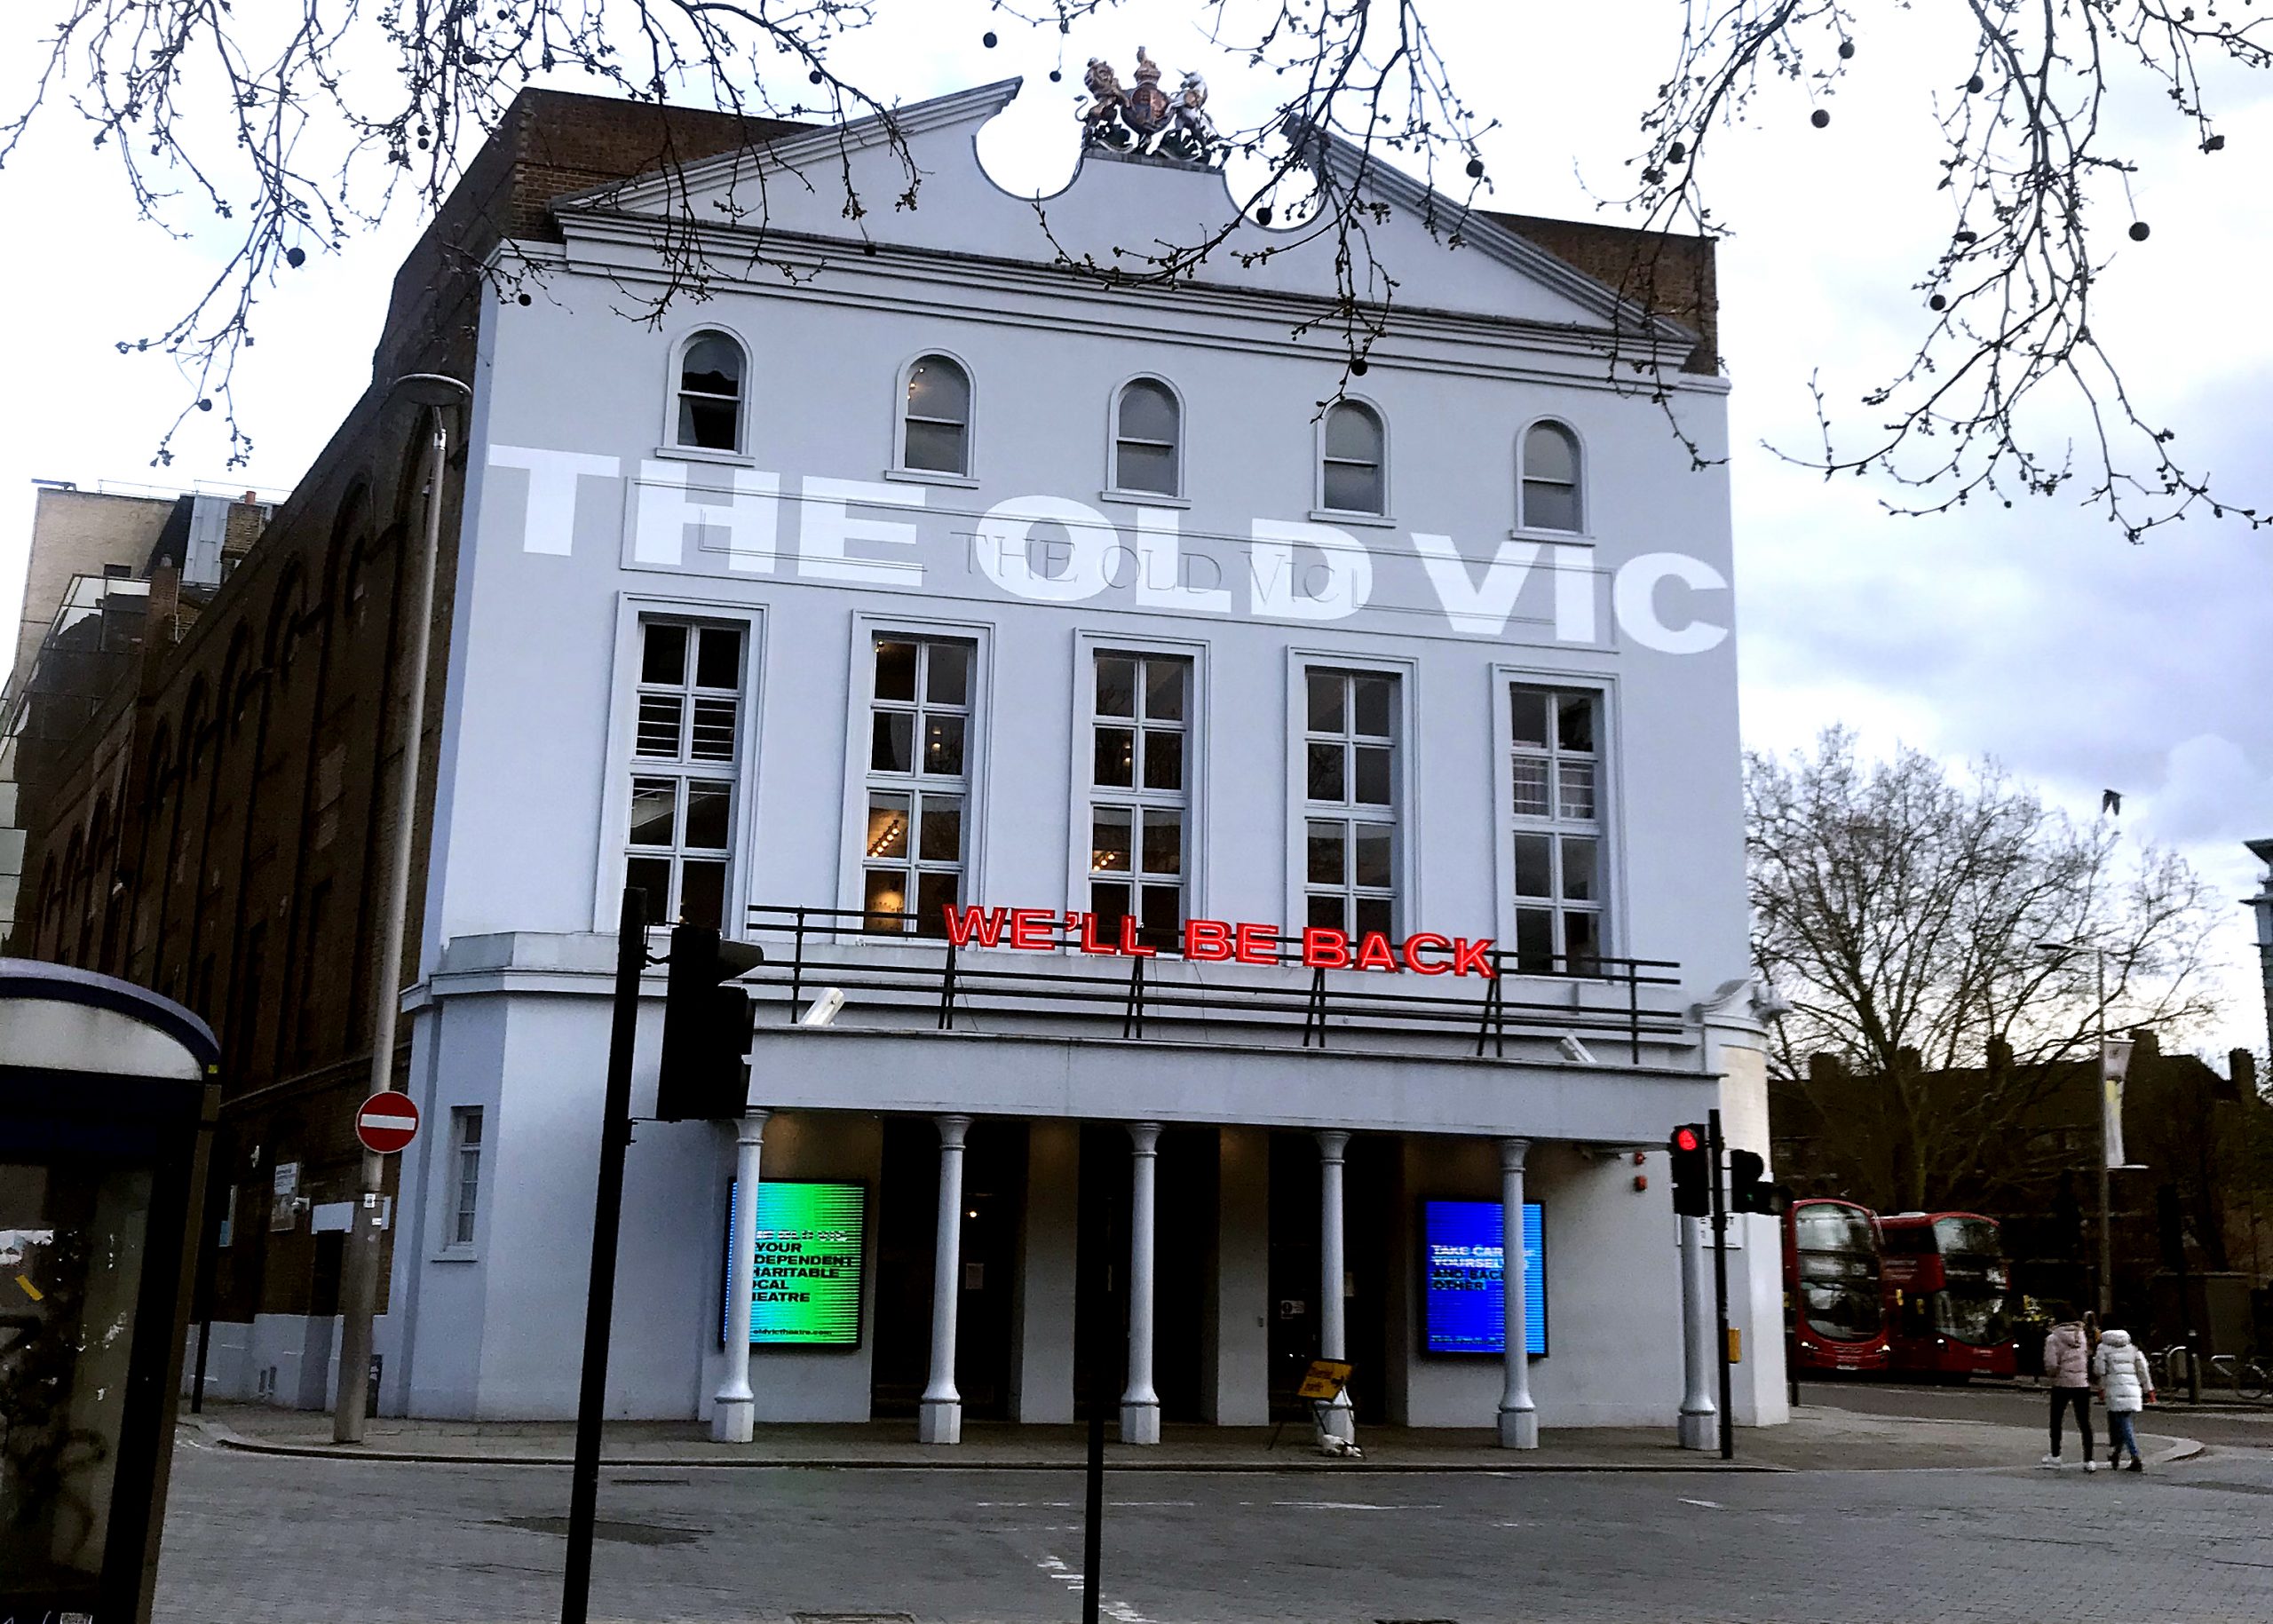 The Old Vic is closed too